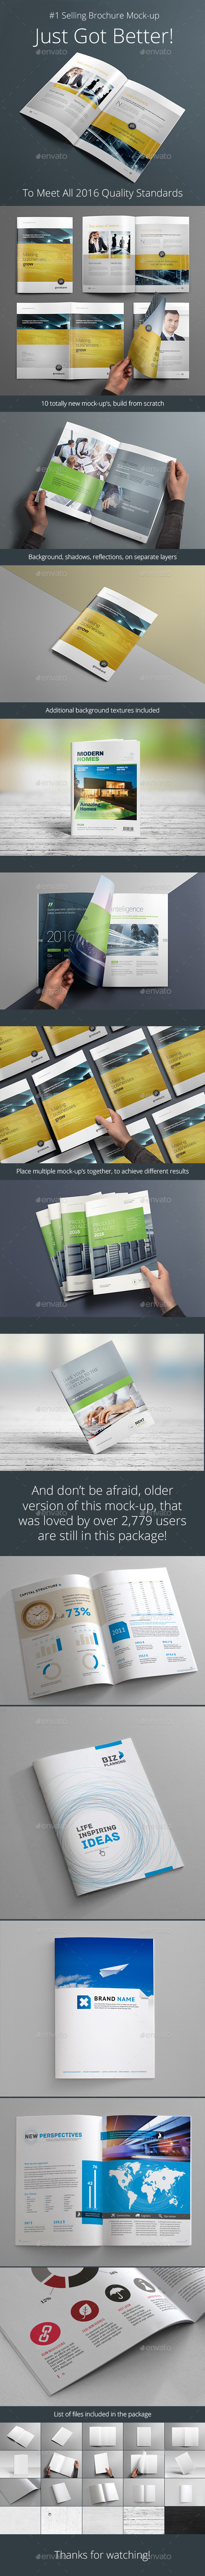 Graphics: A4 Book Booklet Brochure Business Corporate Cover Creator Customizable Customize Elegant Magazine Manuals Mock Up Mock-ups Preview Mockup Multipurpose Photo Photo Realistic Photography Photorealistic Photoshop Presentation Professional Realistic Shadow Showcase Textures Visualization